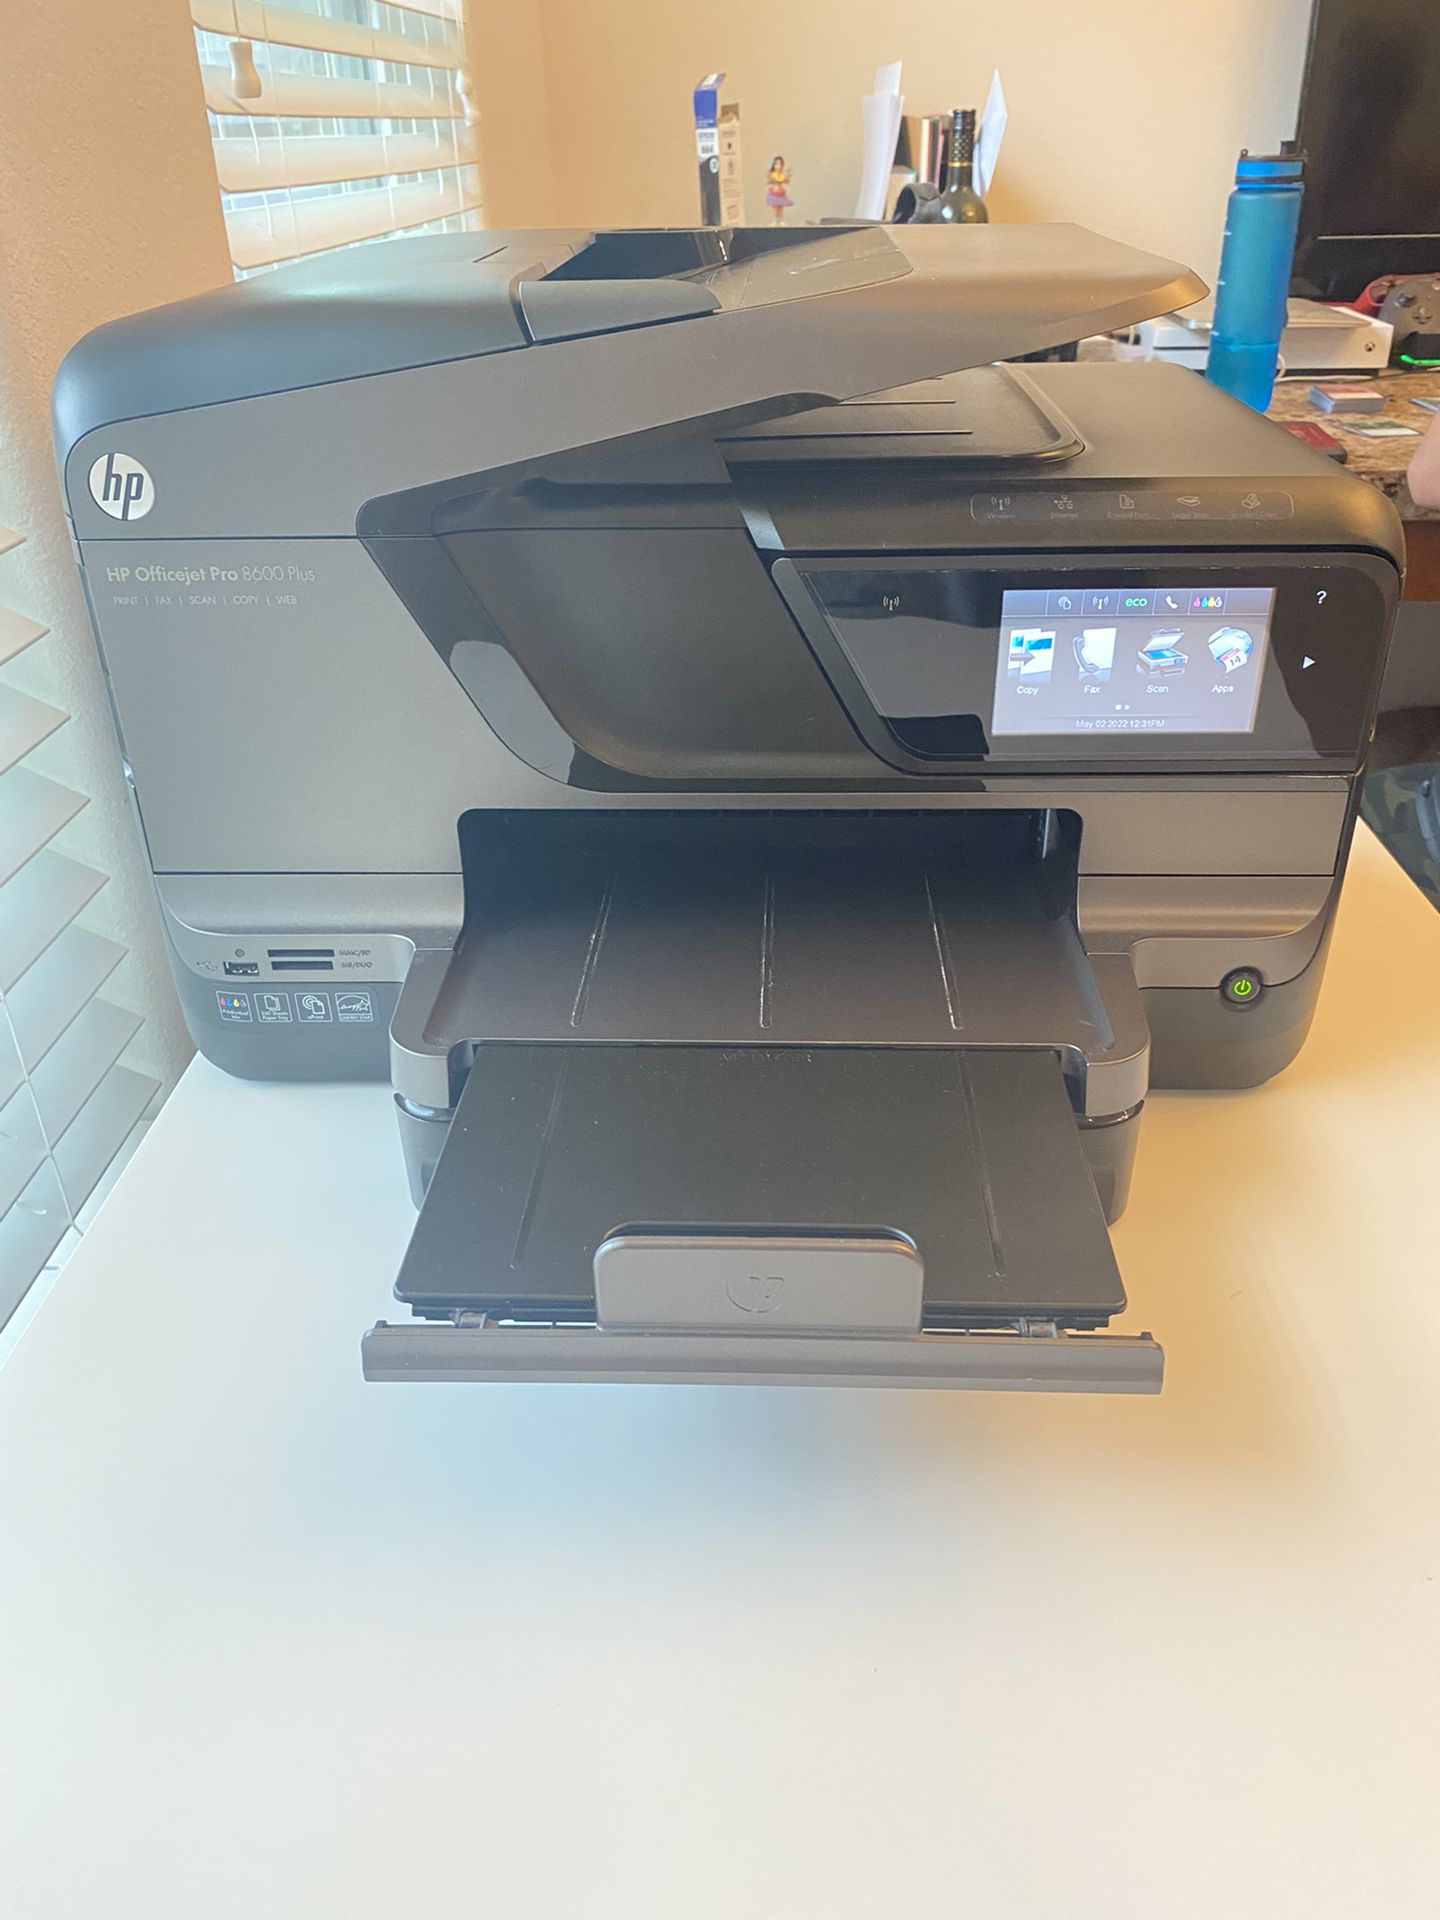 HP Officejet Pro 8600 Plus All In One Ink Jet Printer, Tested Working for Sale Houston, TX - OfferUp